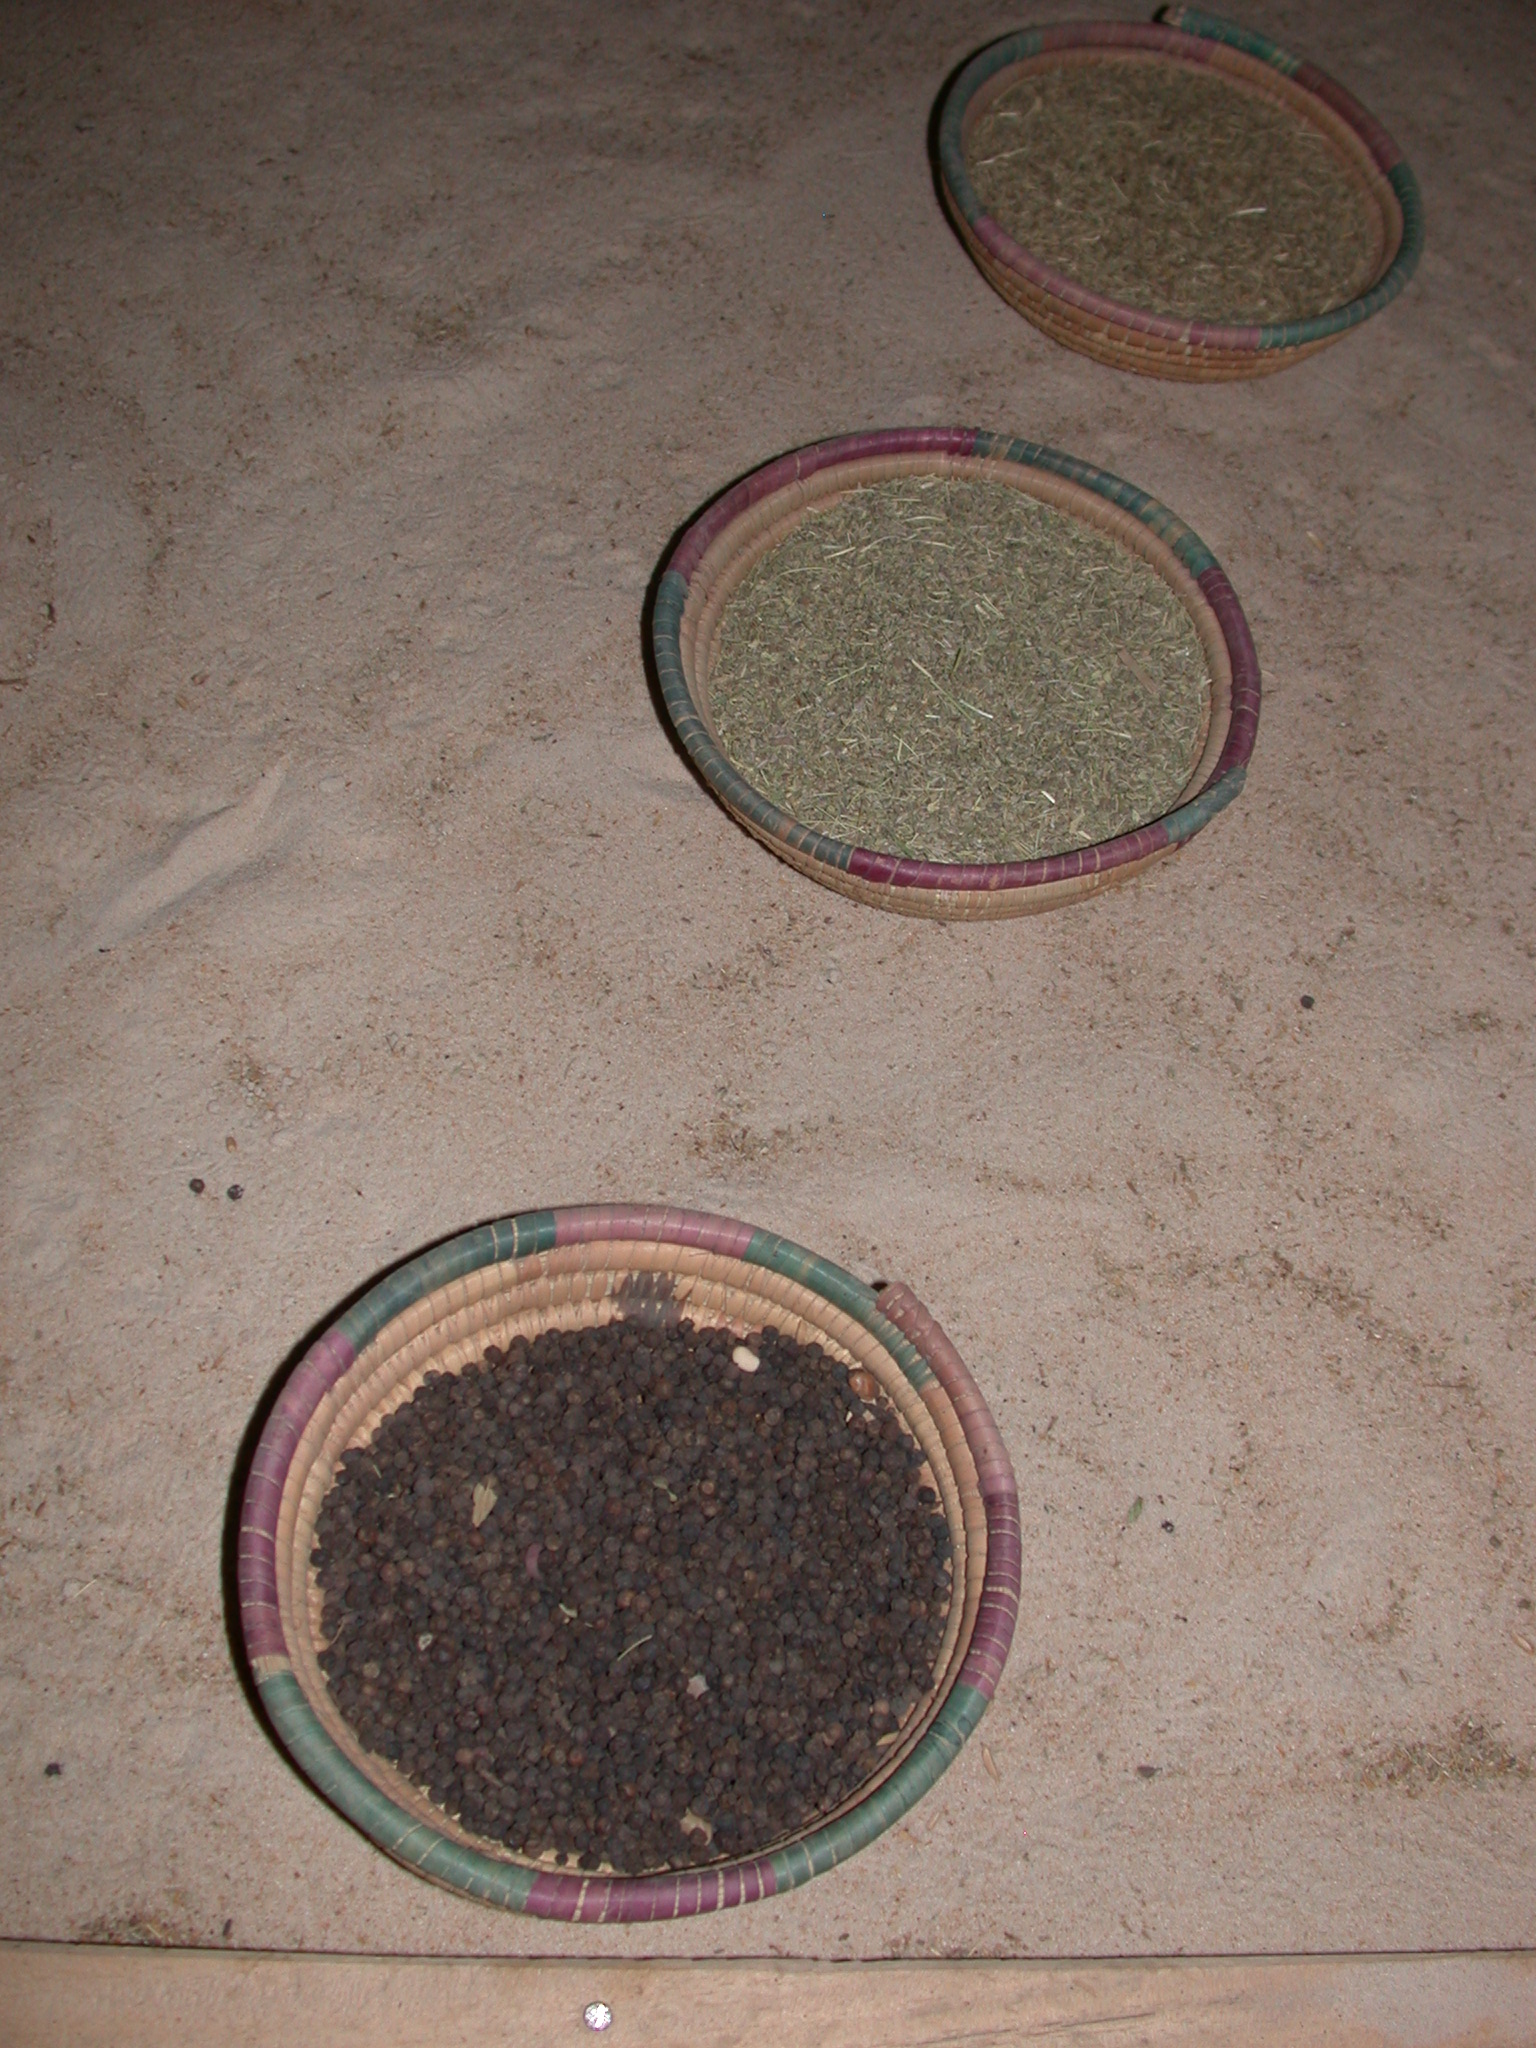 Agricultural Products, Timbuktu Ethnological Museum, Timbuktu, Mali